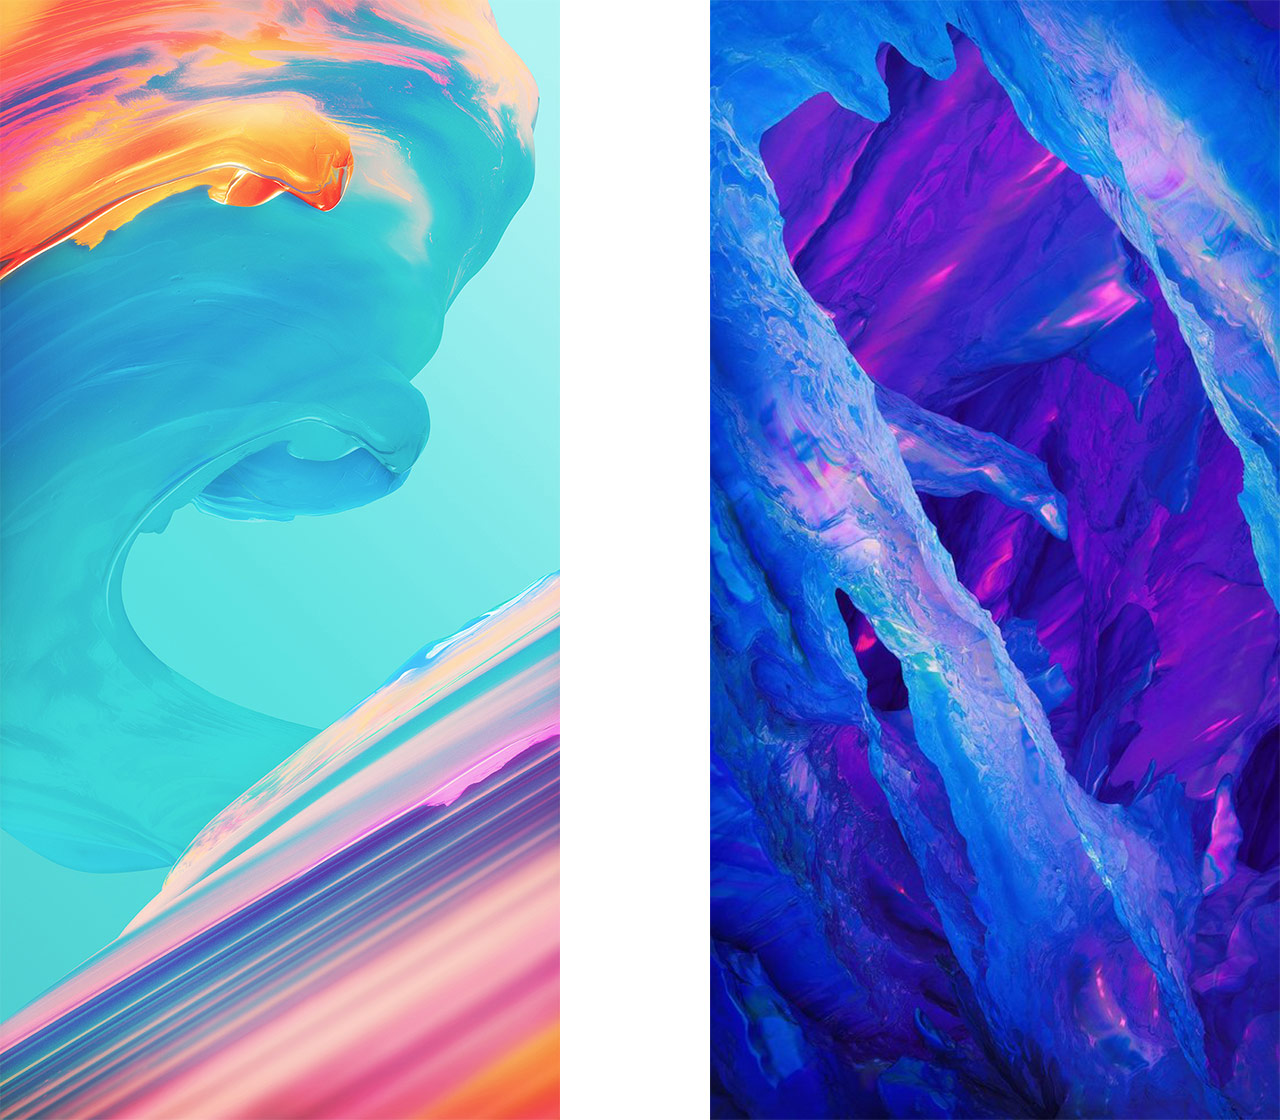 Download the new OnePlus 5T wallpapers to your smartphone